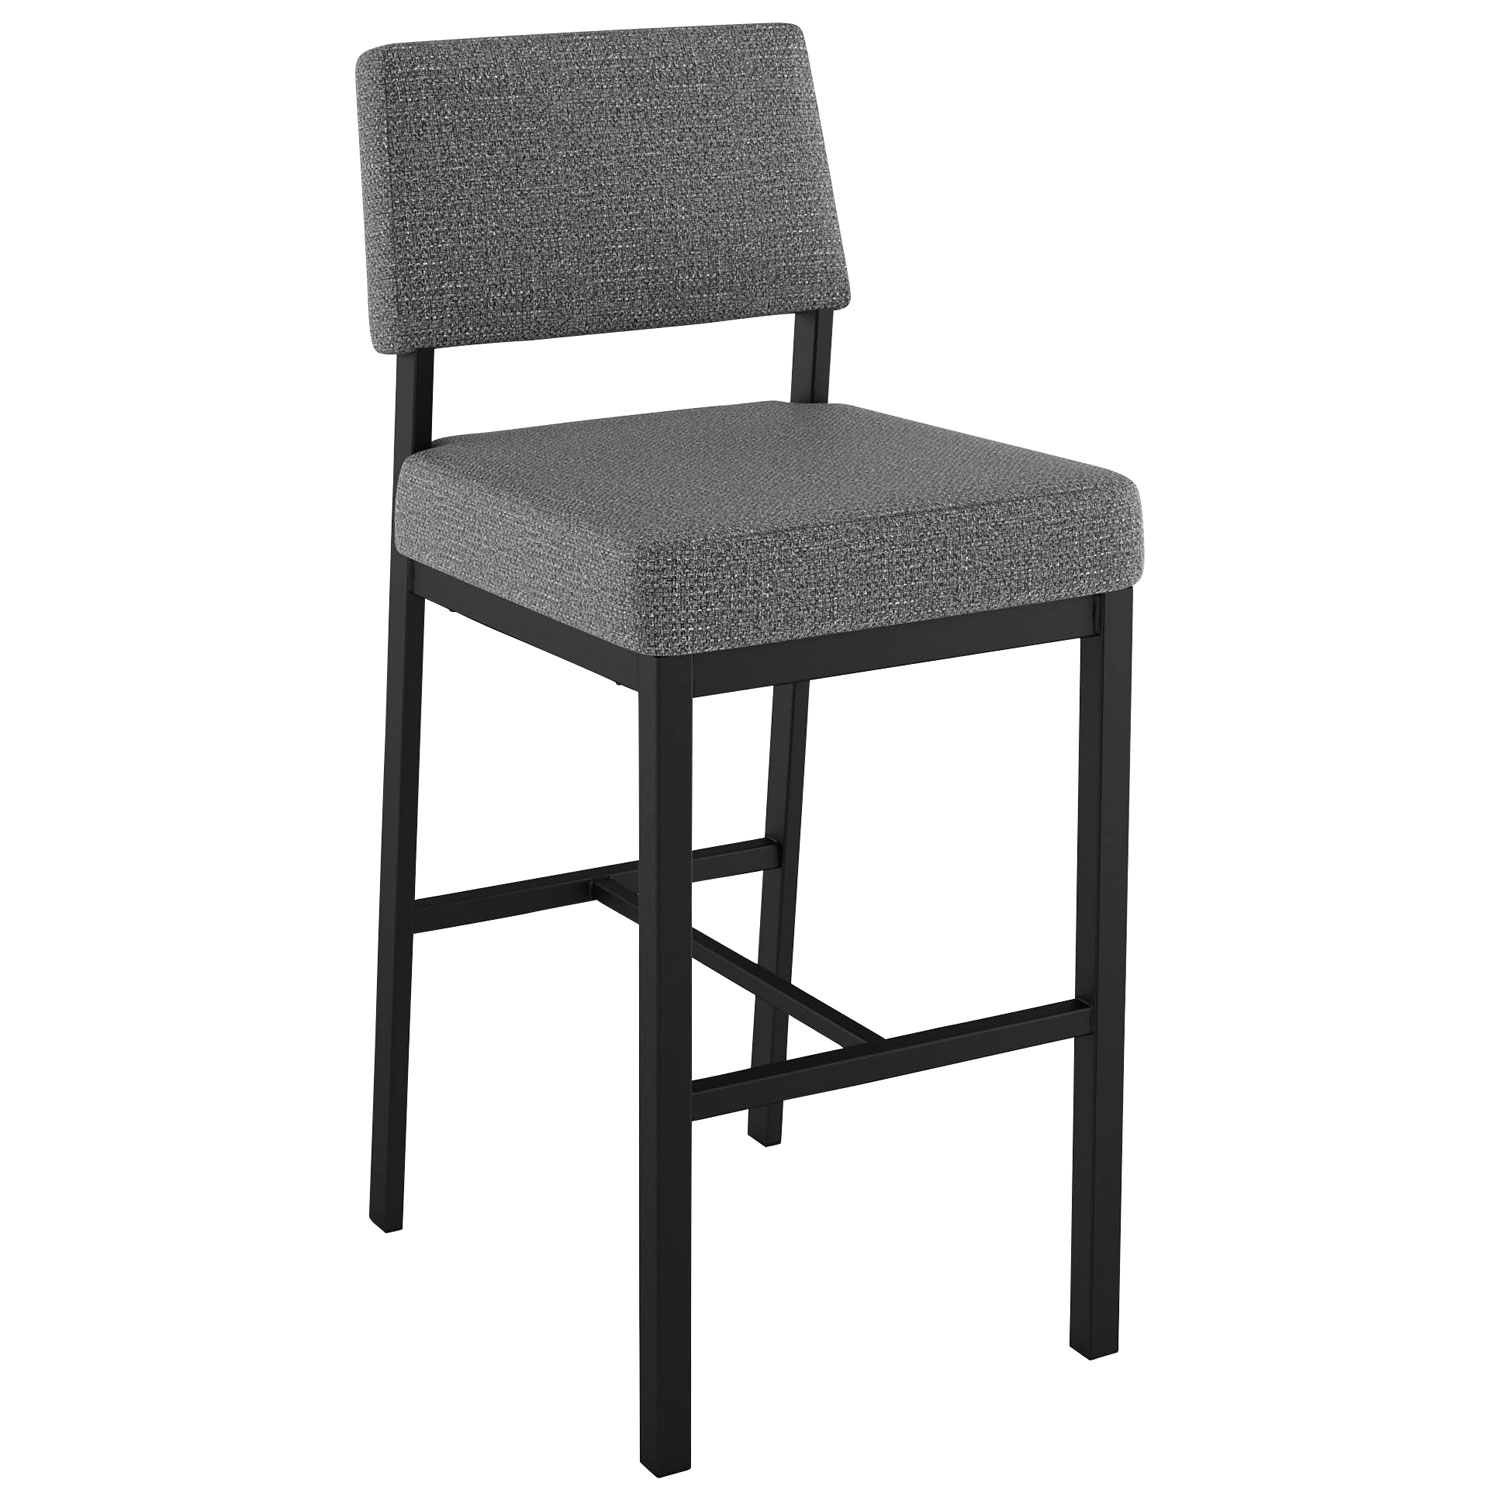 Avery Rustic Country Bar Height Barstool - Grey Woven/Black